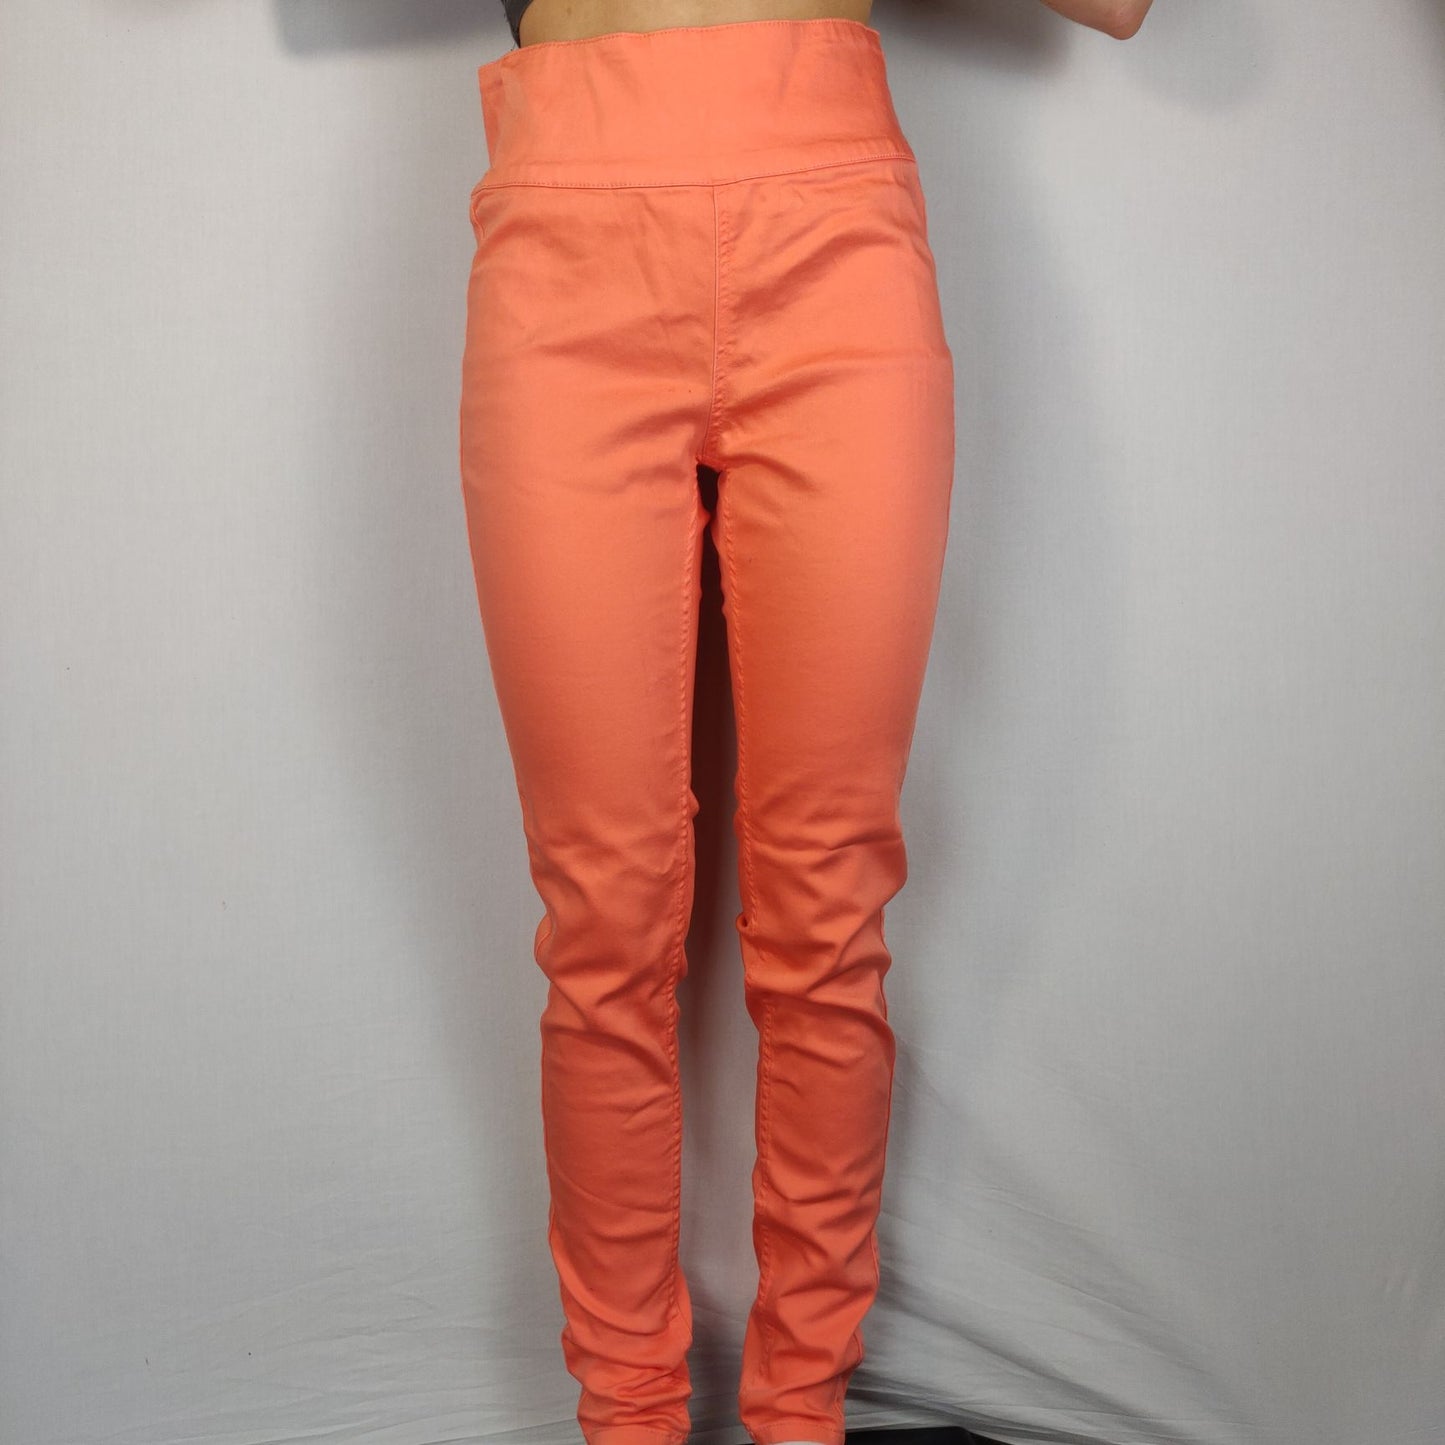 Pieces Coral High Waist Trousers Women Size Medium/Large